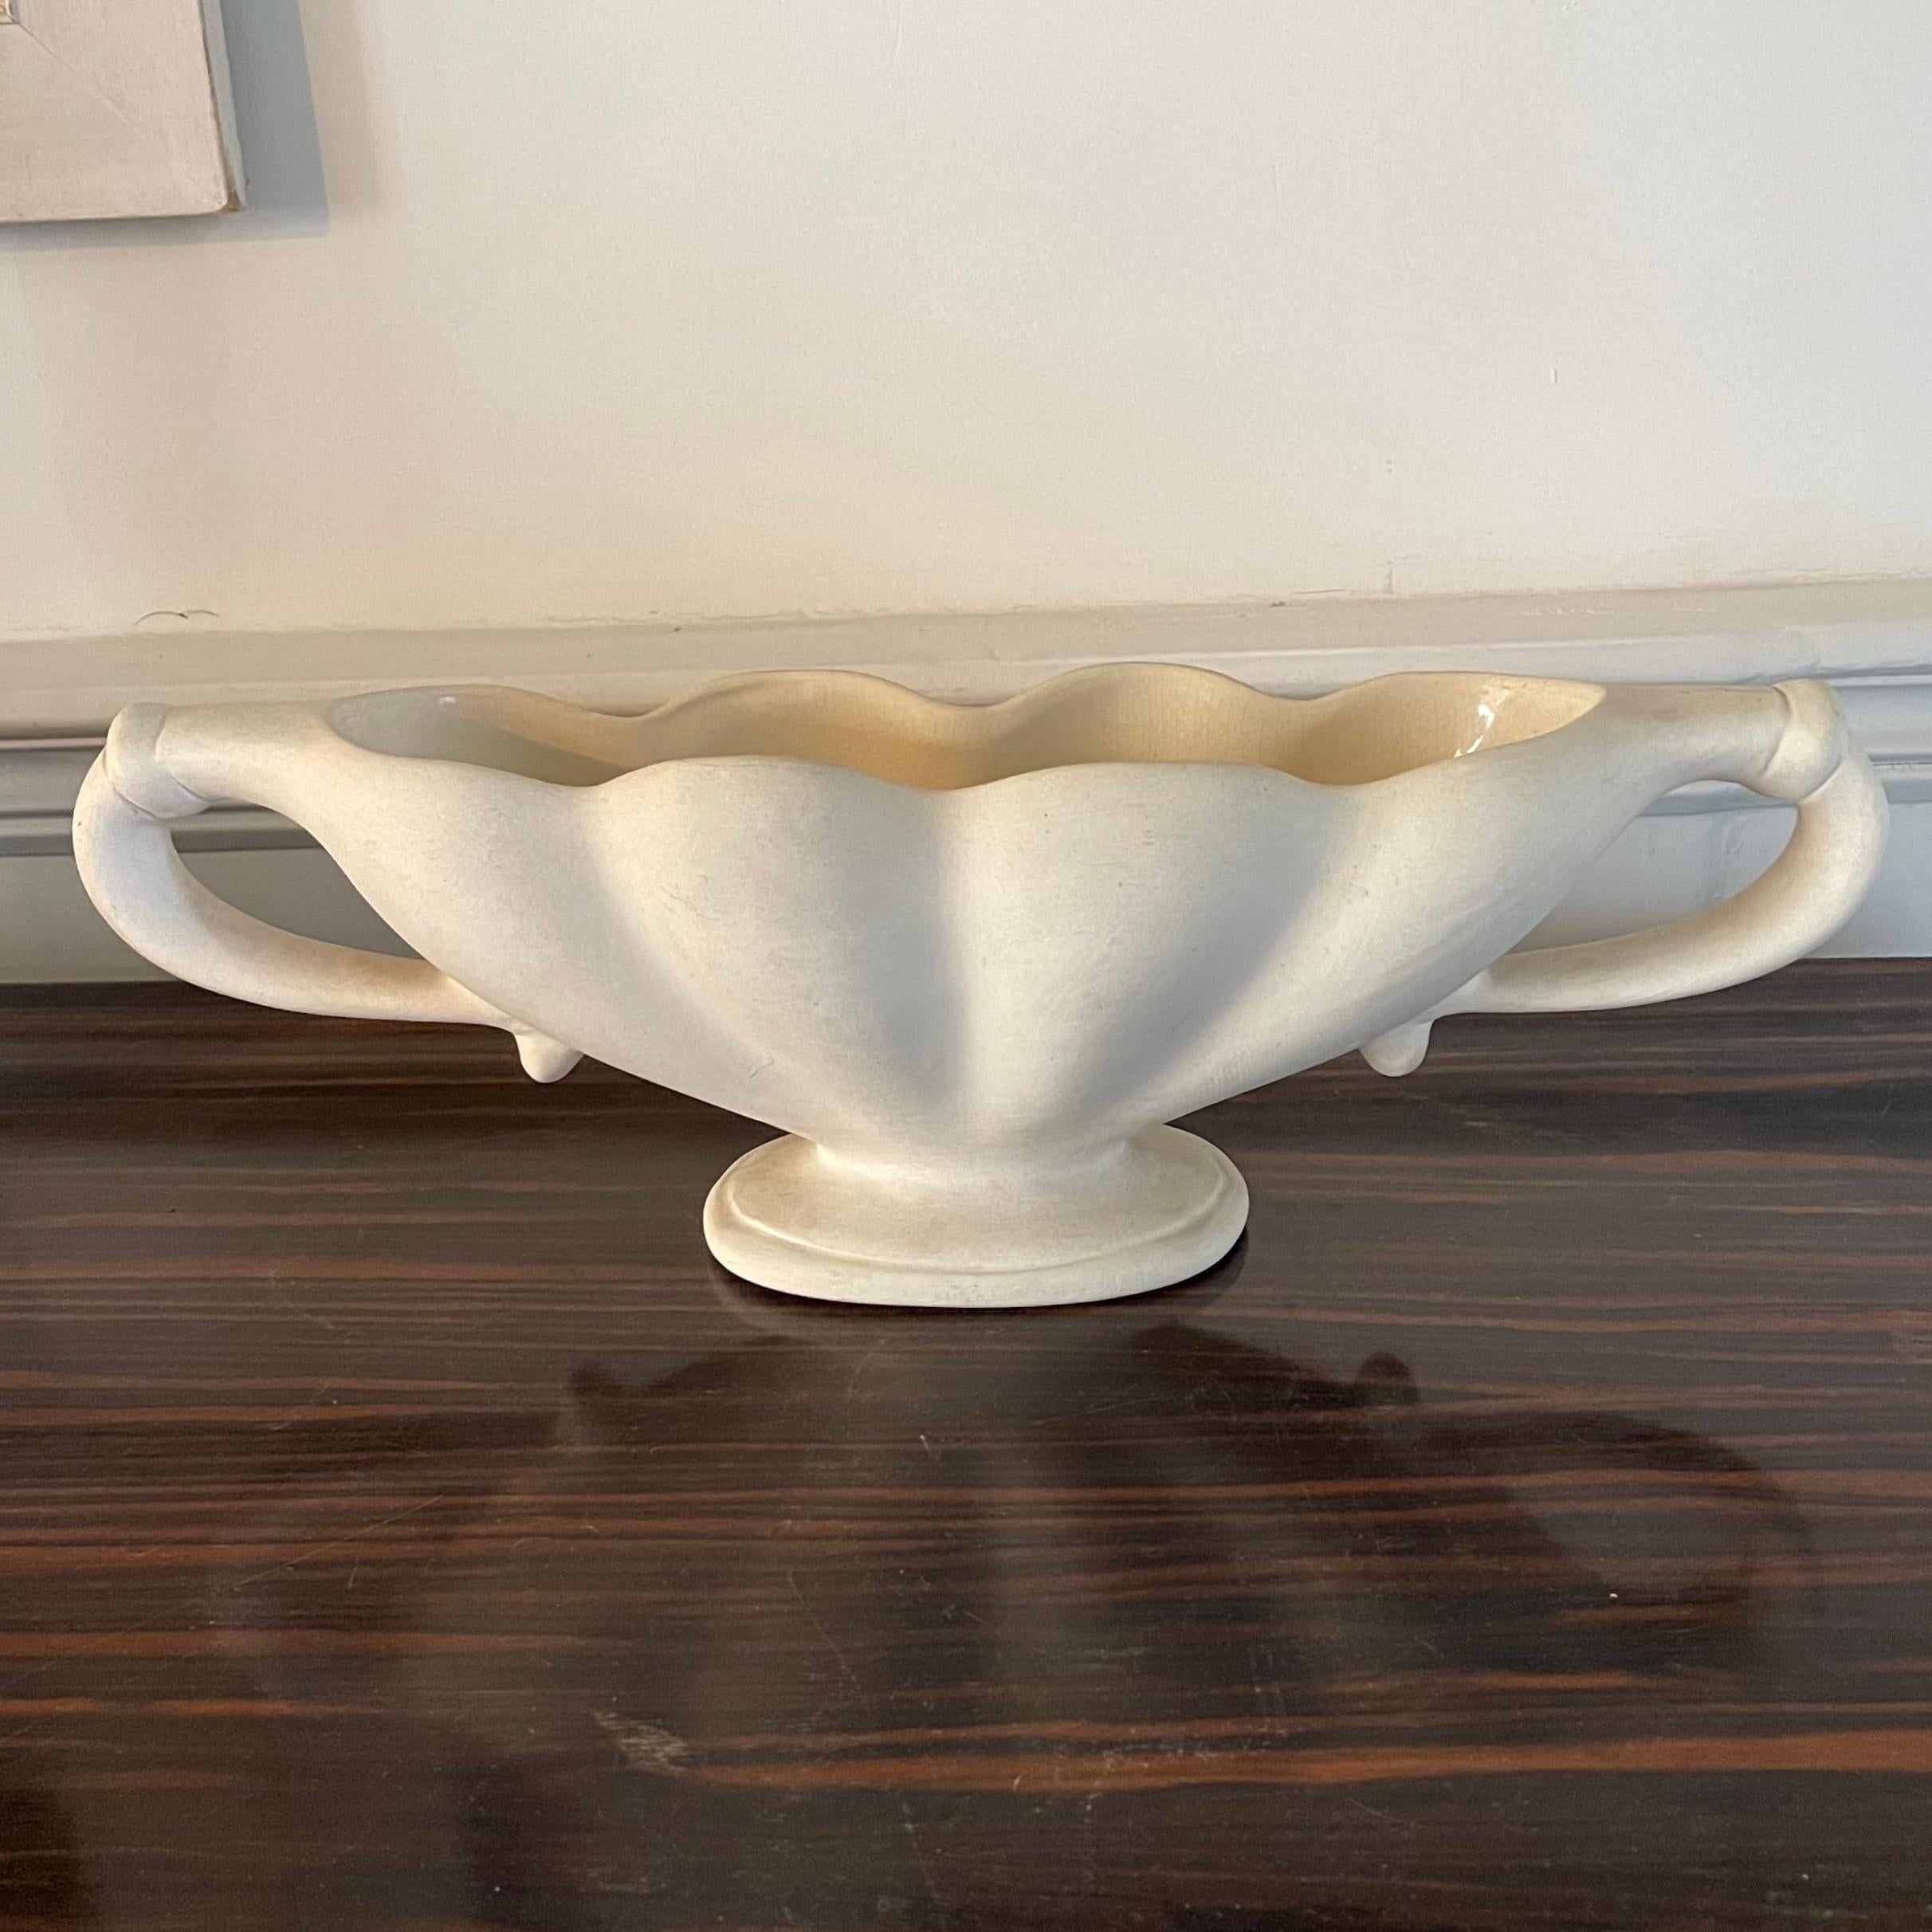 Constance Spry for Fulham Pottery vase circa 1930s 

Desirable scalloped body and curved handles with decorative banding, finished in sought after unglazed cream, formed onto an oval pedestal base. 

Fulham Pottery stamp impressed to the base.